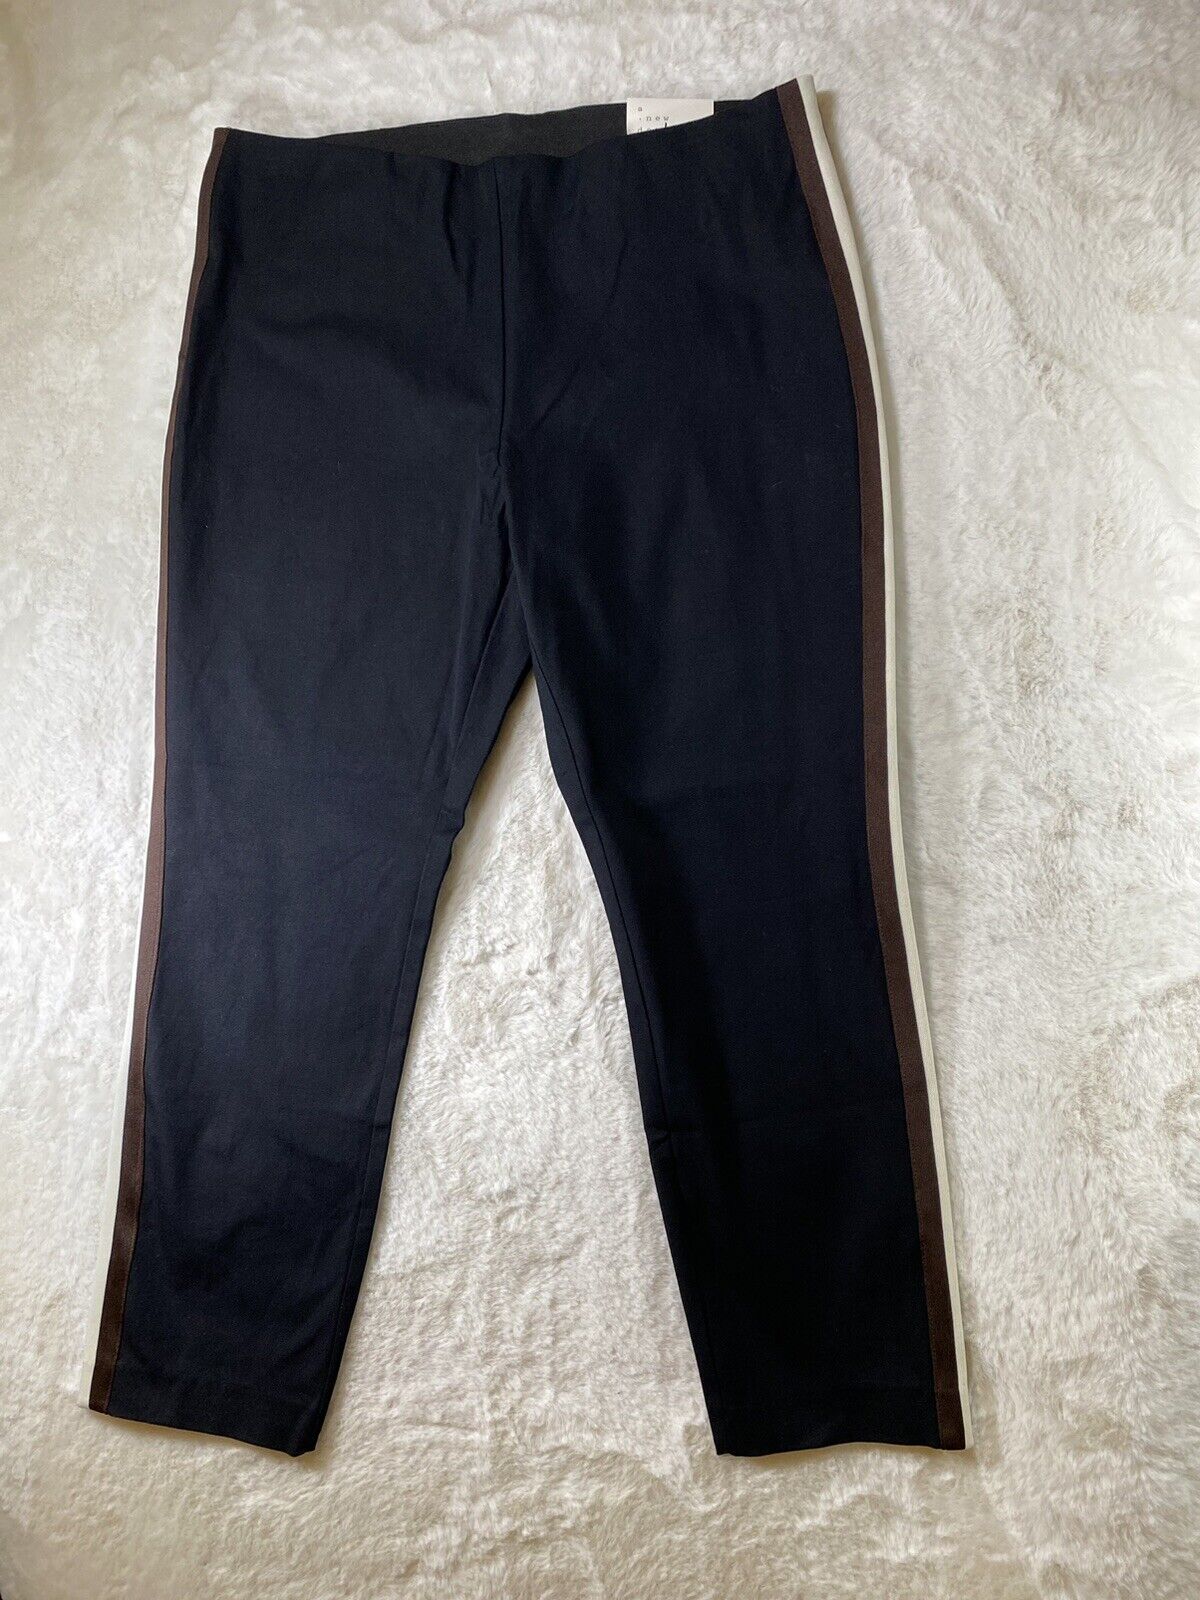 A New Day Pants Women's size 16 R High-Rise Skinny Ankle Black Side Stripe  NEW